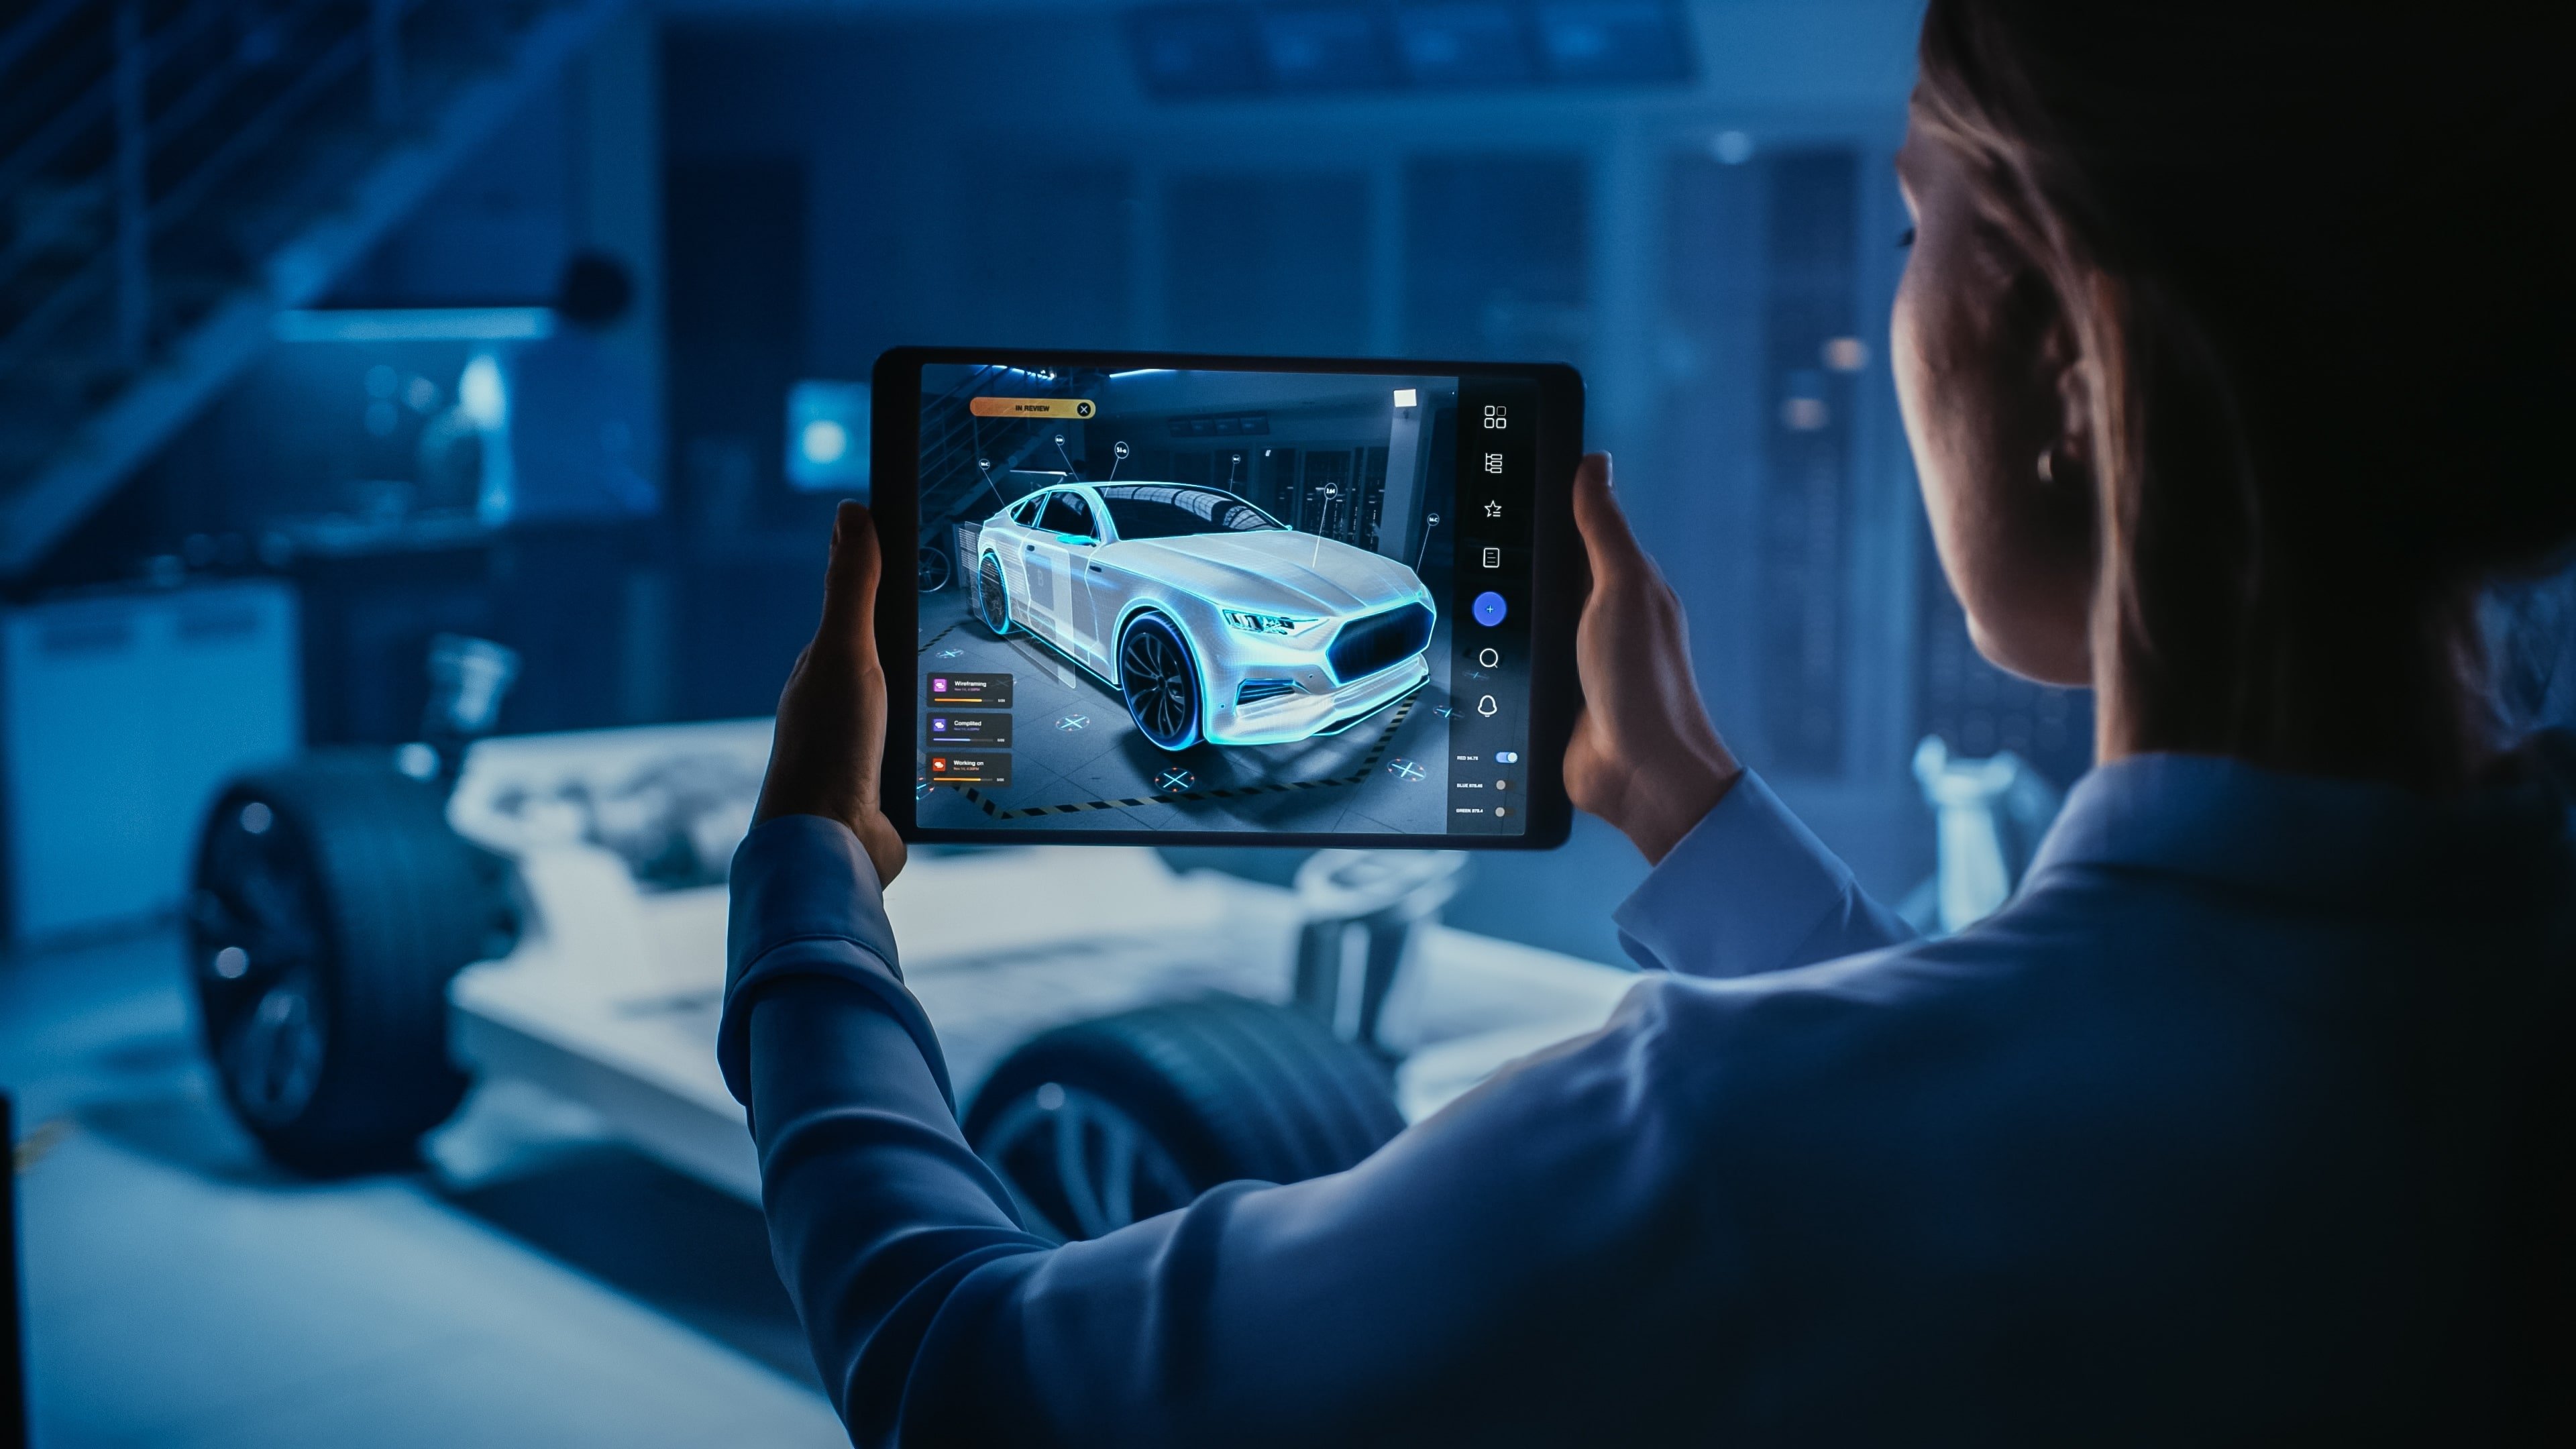 How Augmented Reality (AR) technologies are transforming the automotive industry